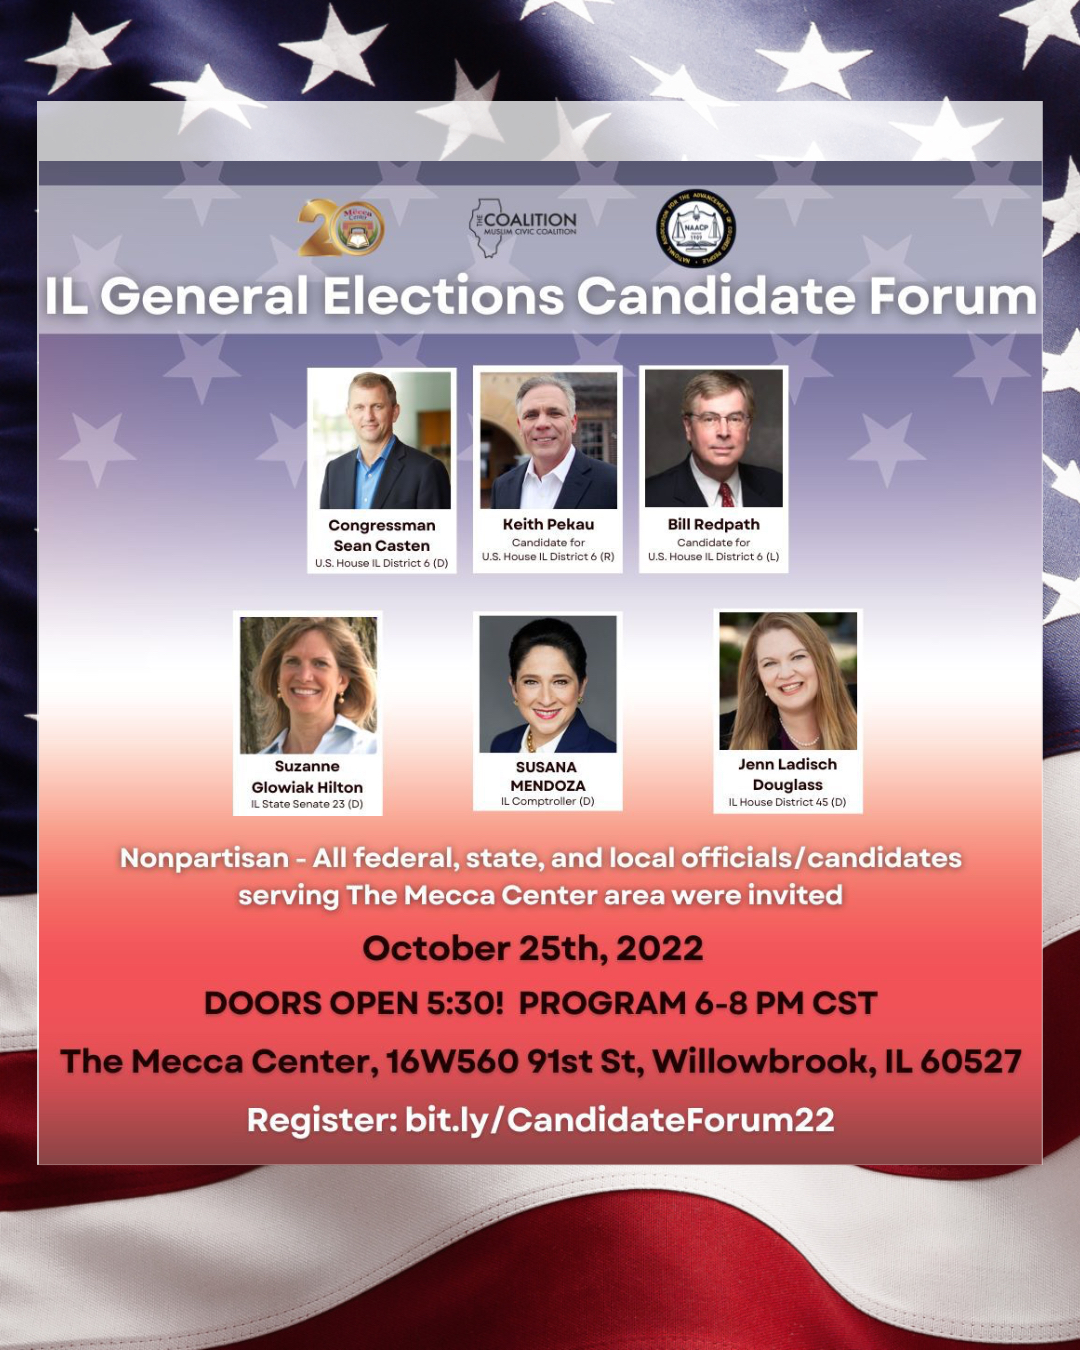 Illinois General Elections Candidate Forum The Mecca Center